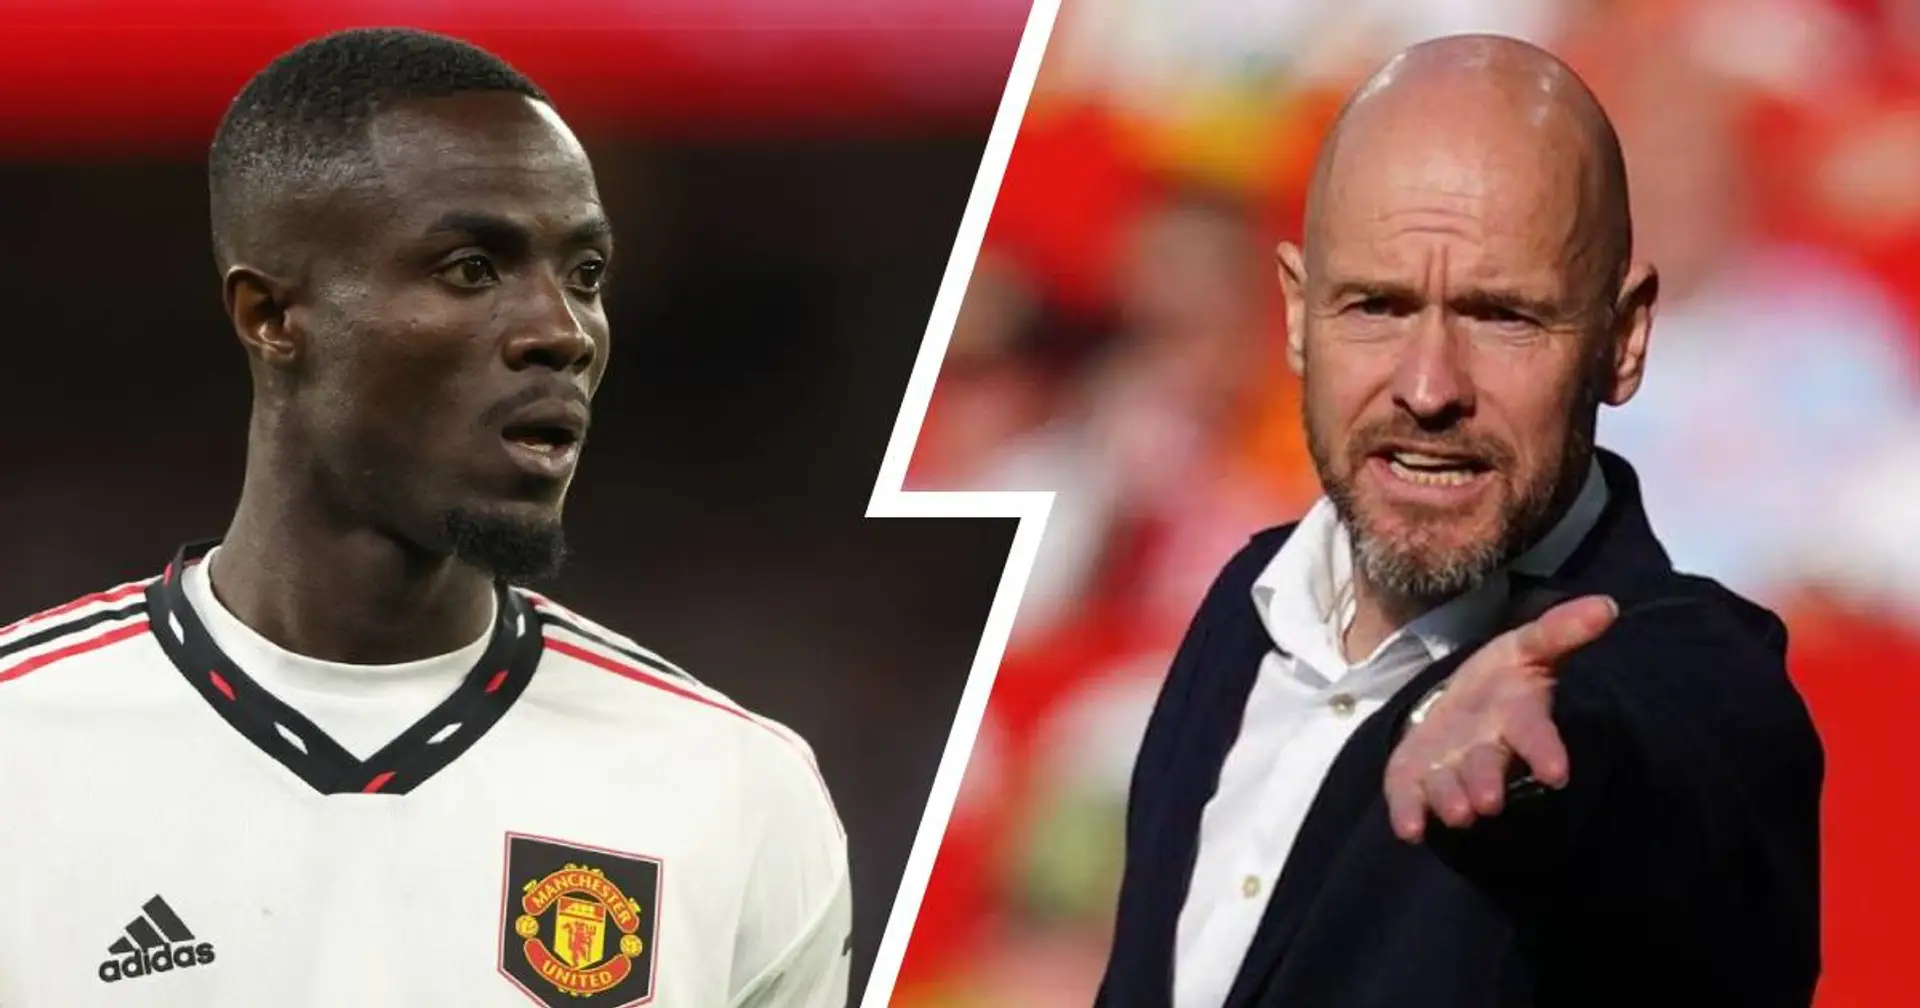 Man United list 2 players as 'must-sell' — Bailly is one of them